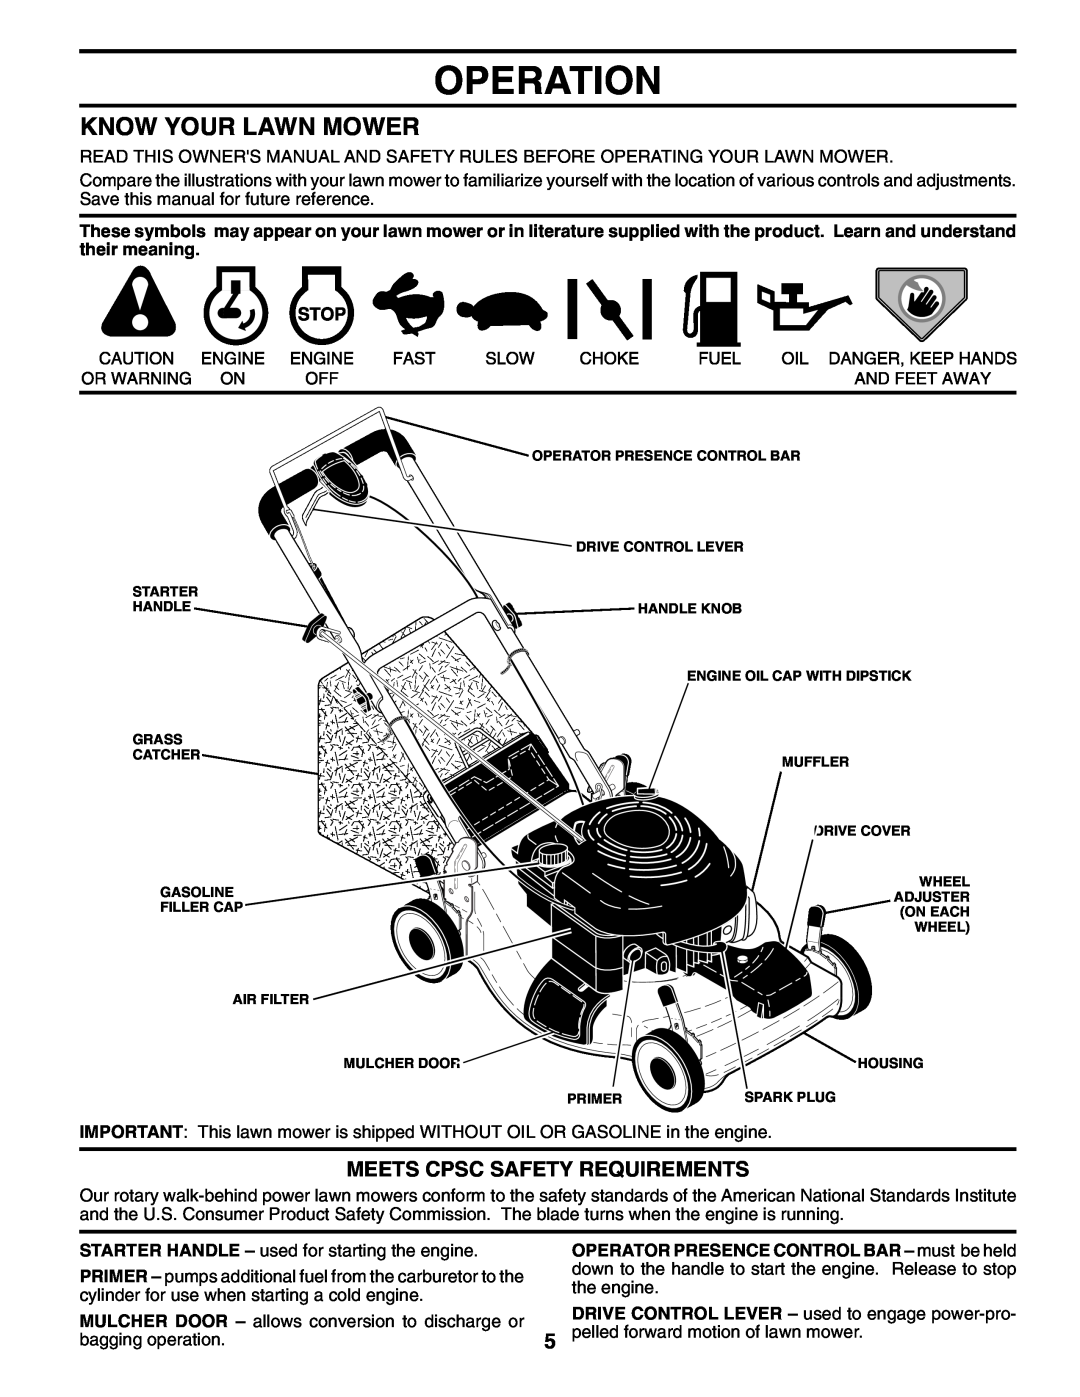 Husqvarna 6522SL owner manual Operation, Know Your Lawn Mower, Meets Cpsc Safety Requirements 